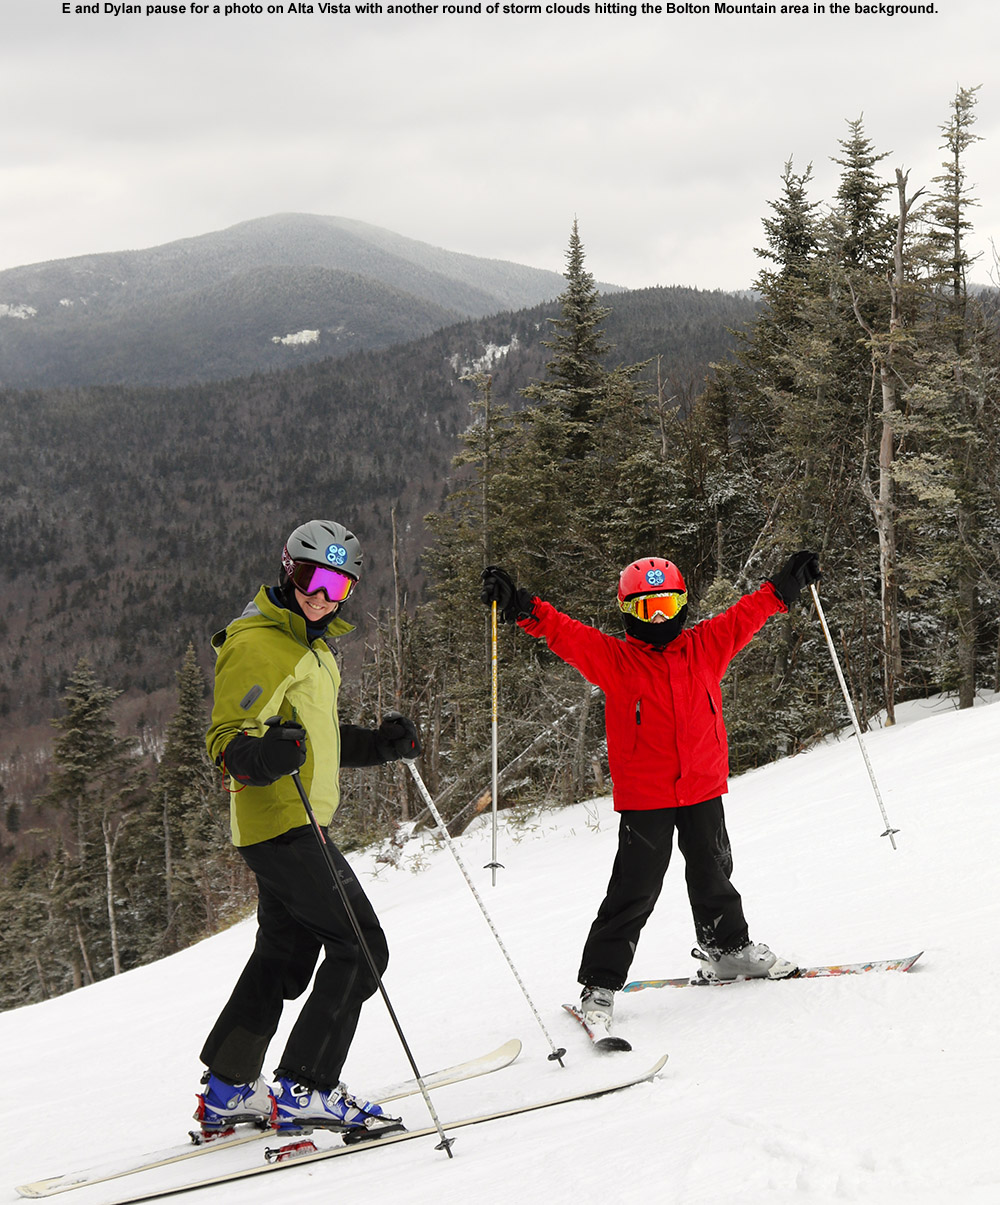 An image of Erica and Dylan near the top of the Alta Vista trail at Bolton Valley Ski Resort in Vermont